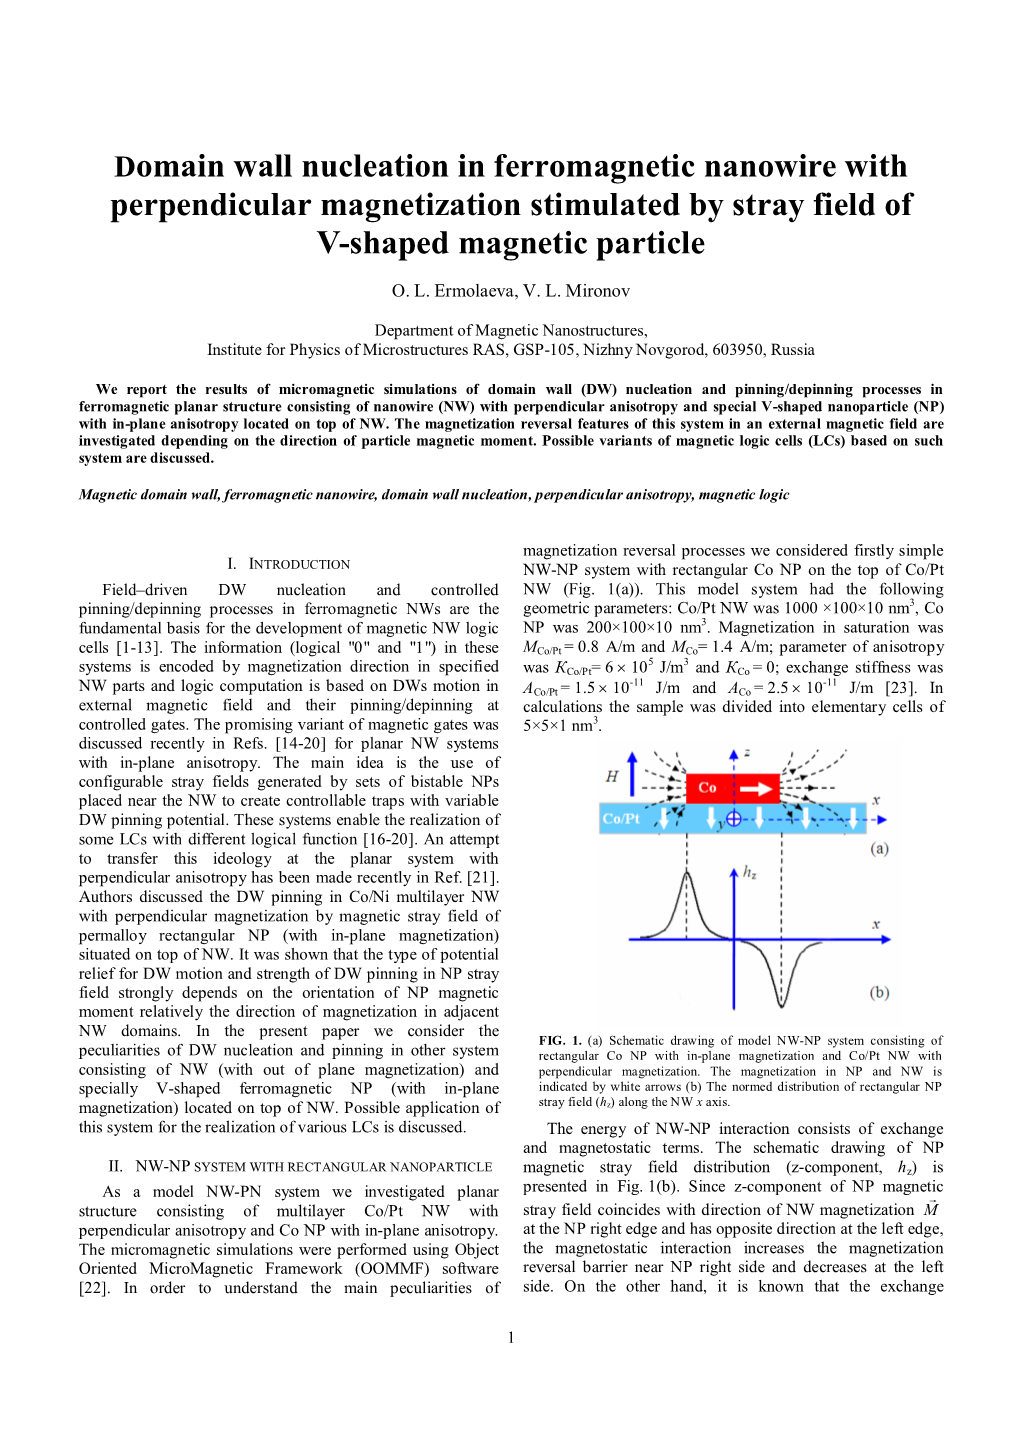 Domain Wall Nucleation in Ferromagnetic Nanowire with Perpendicular Magnetization Stimulated by Stray Field of V-Shaped Magnetic Particle